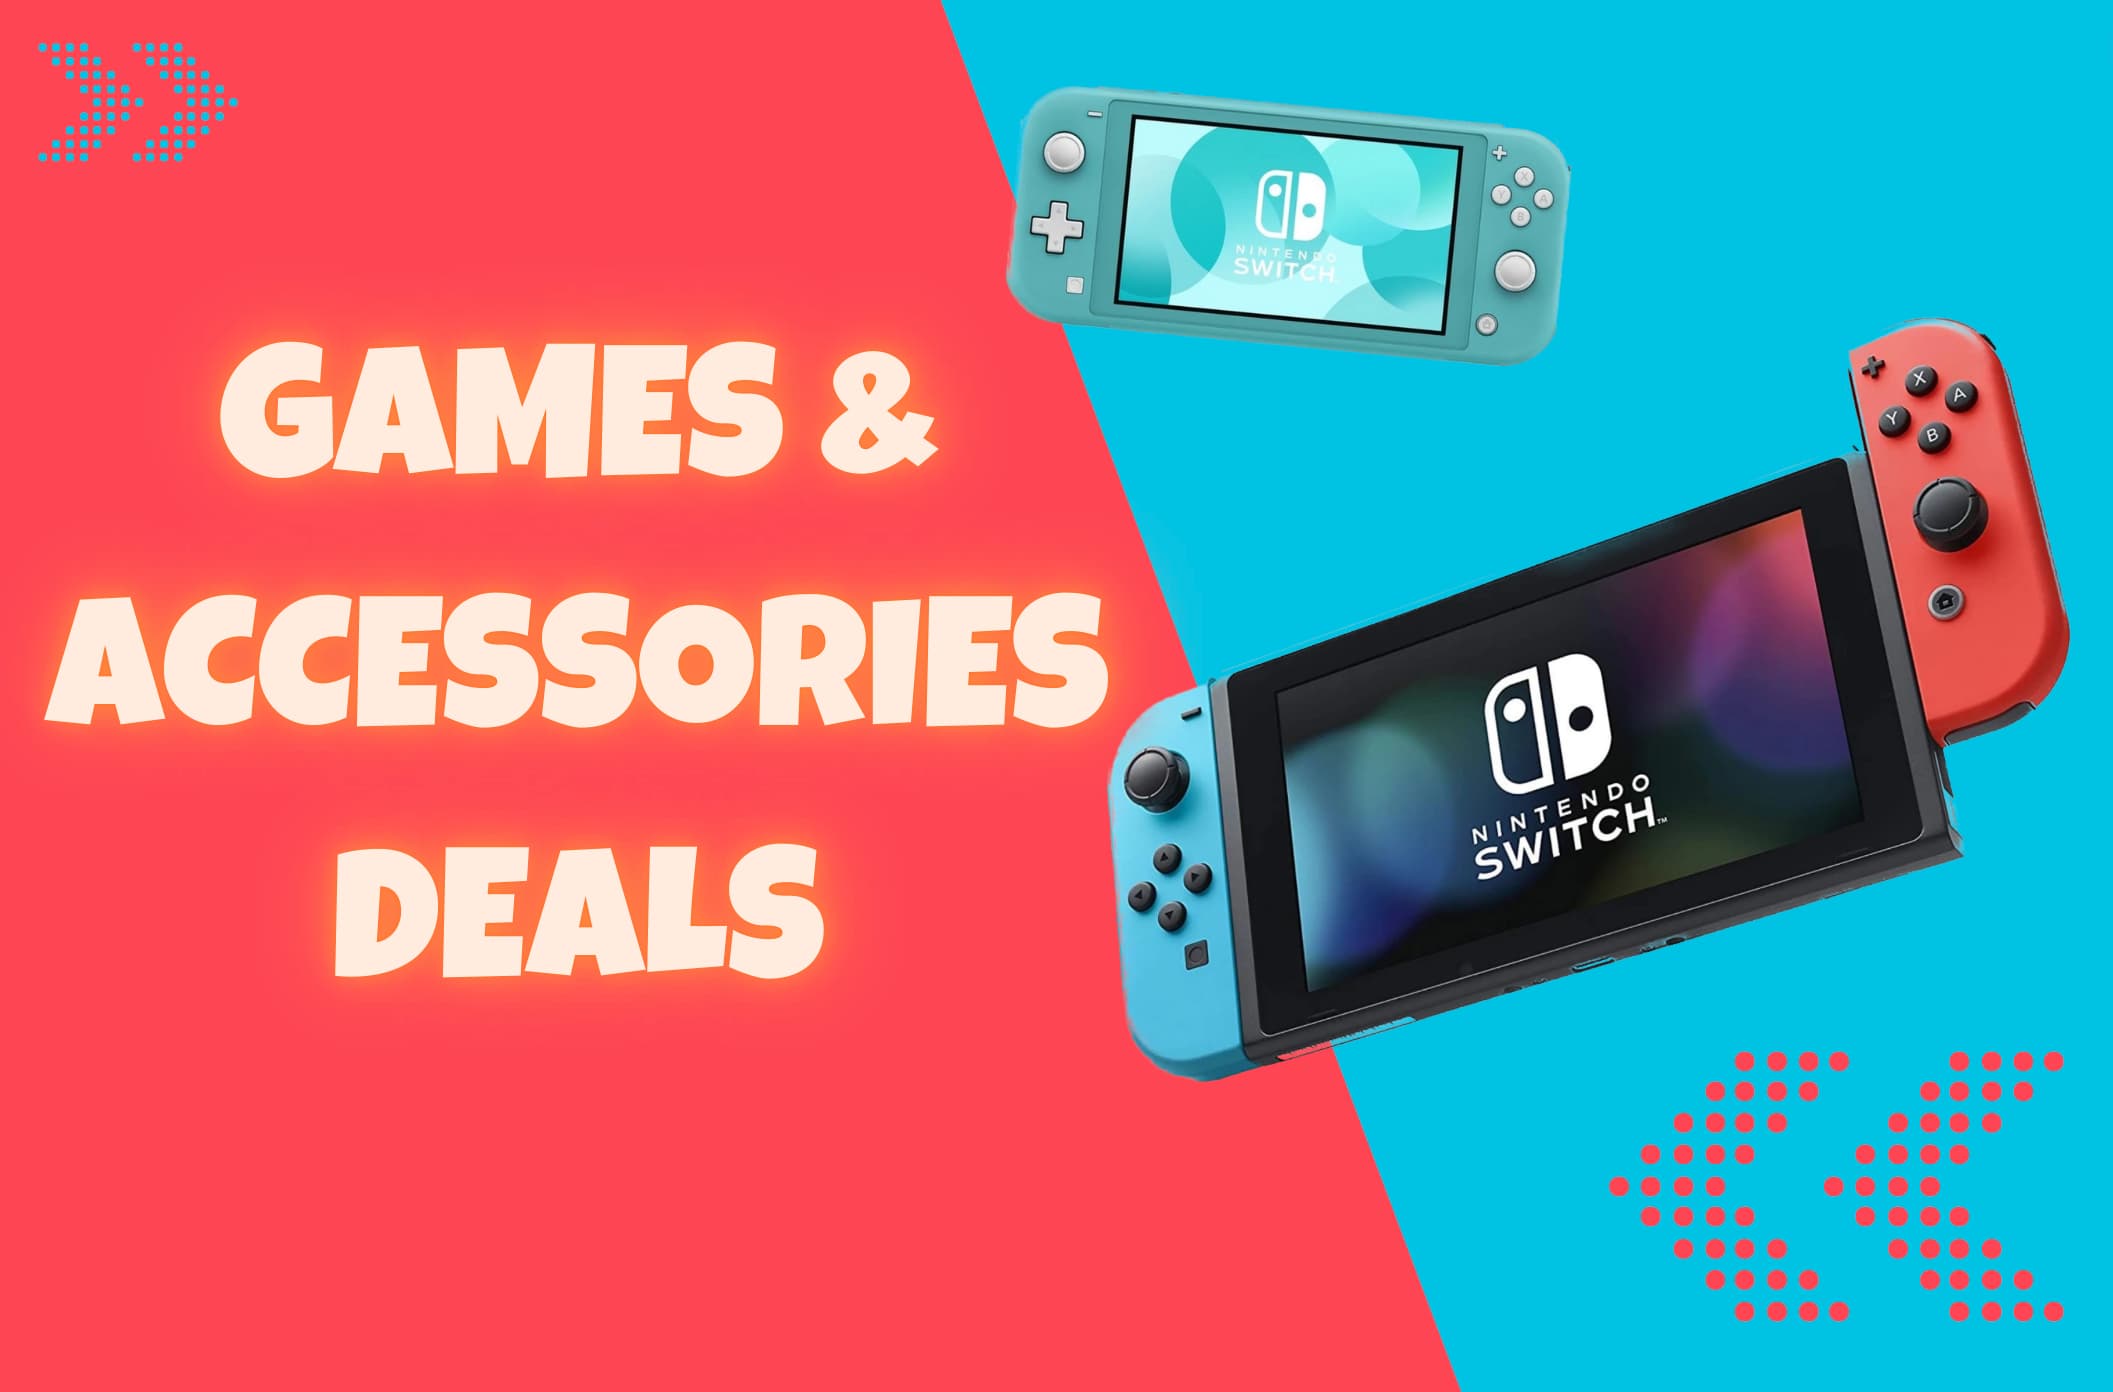 The best Black Friday deals on Nintendo Switch games & accessories